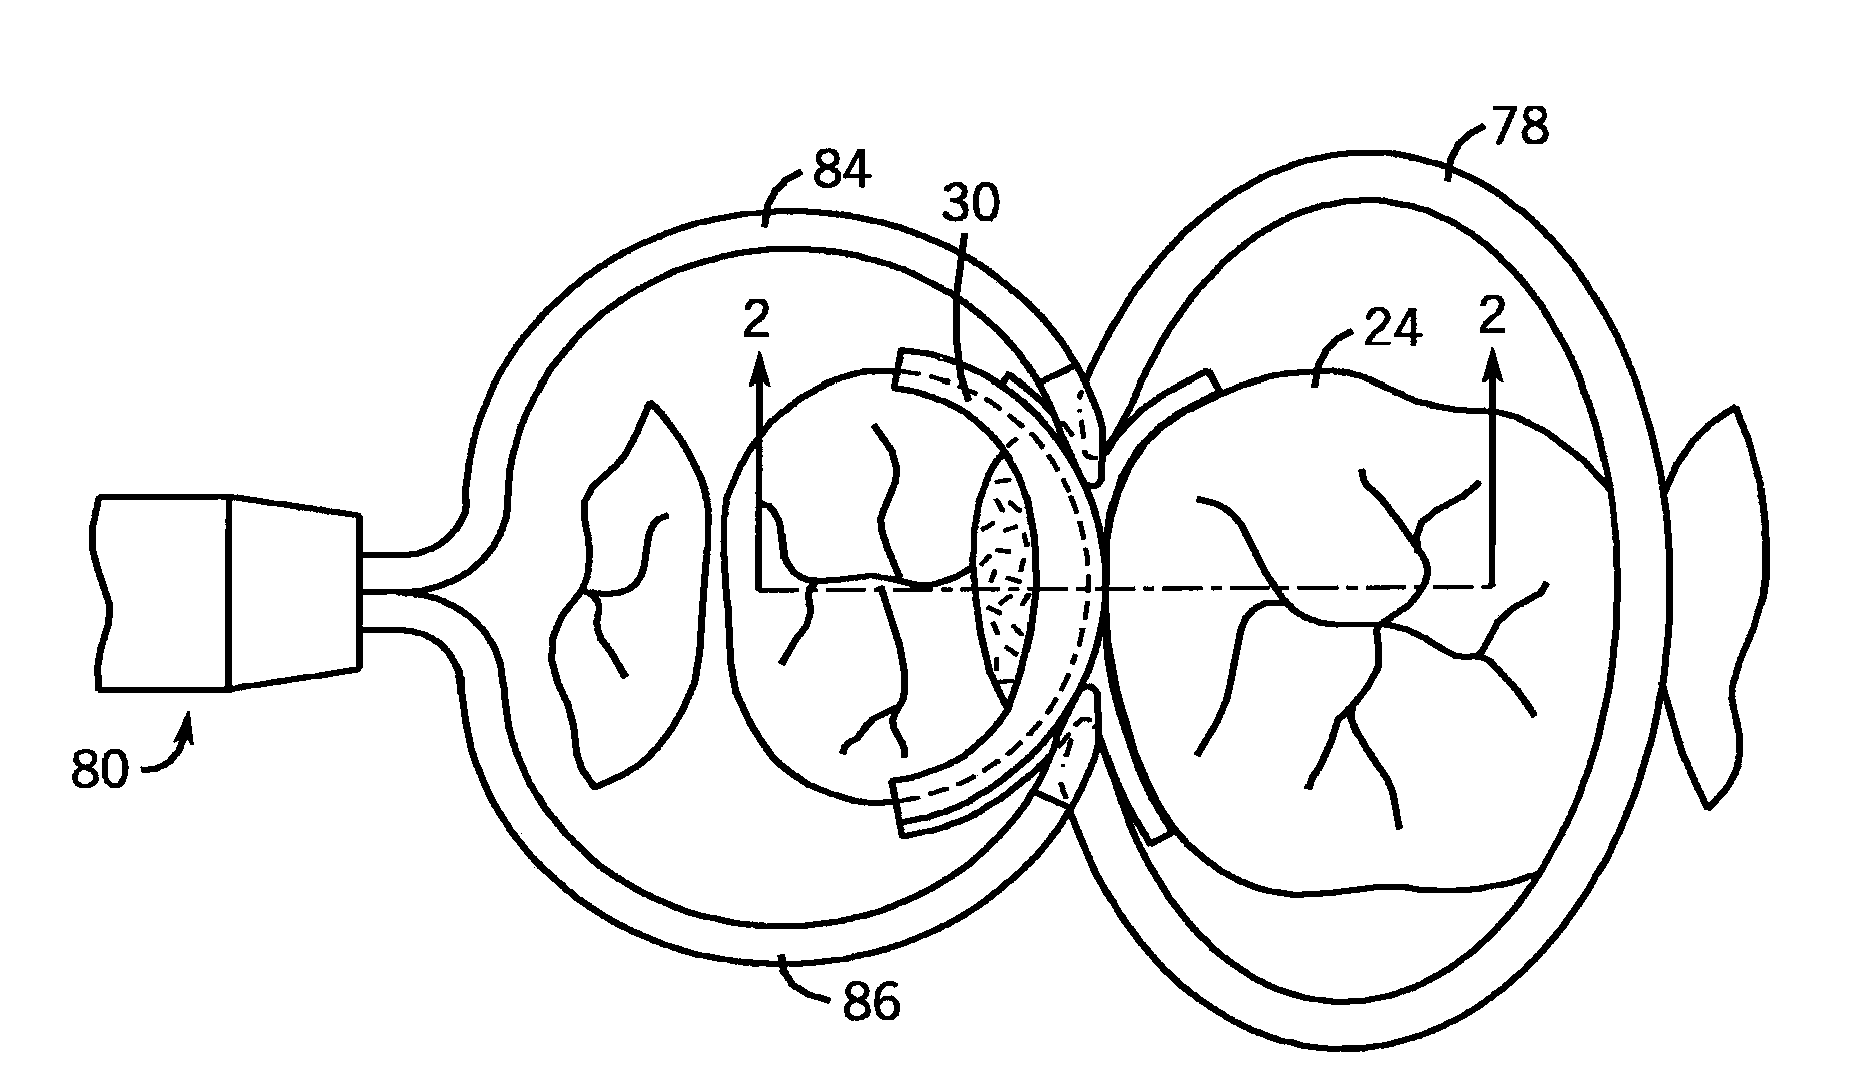 Dental Separator Rings And A Seamless, Single Load Cavity Preparation And Filling Technique